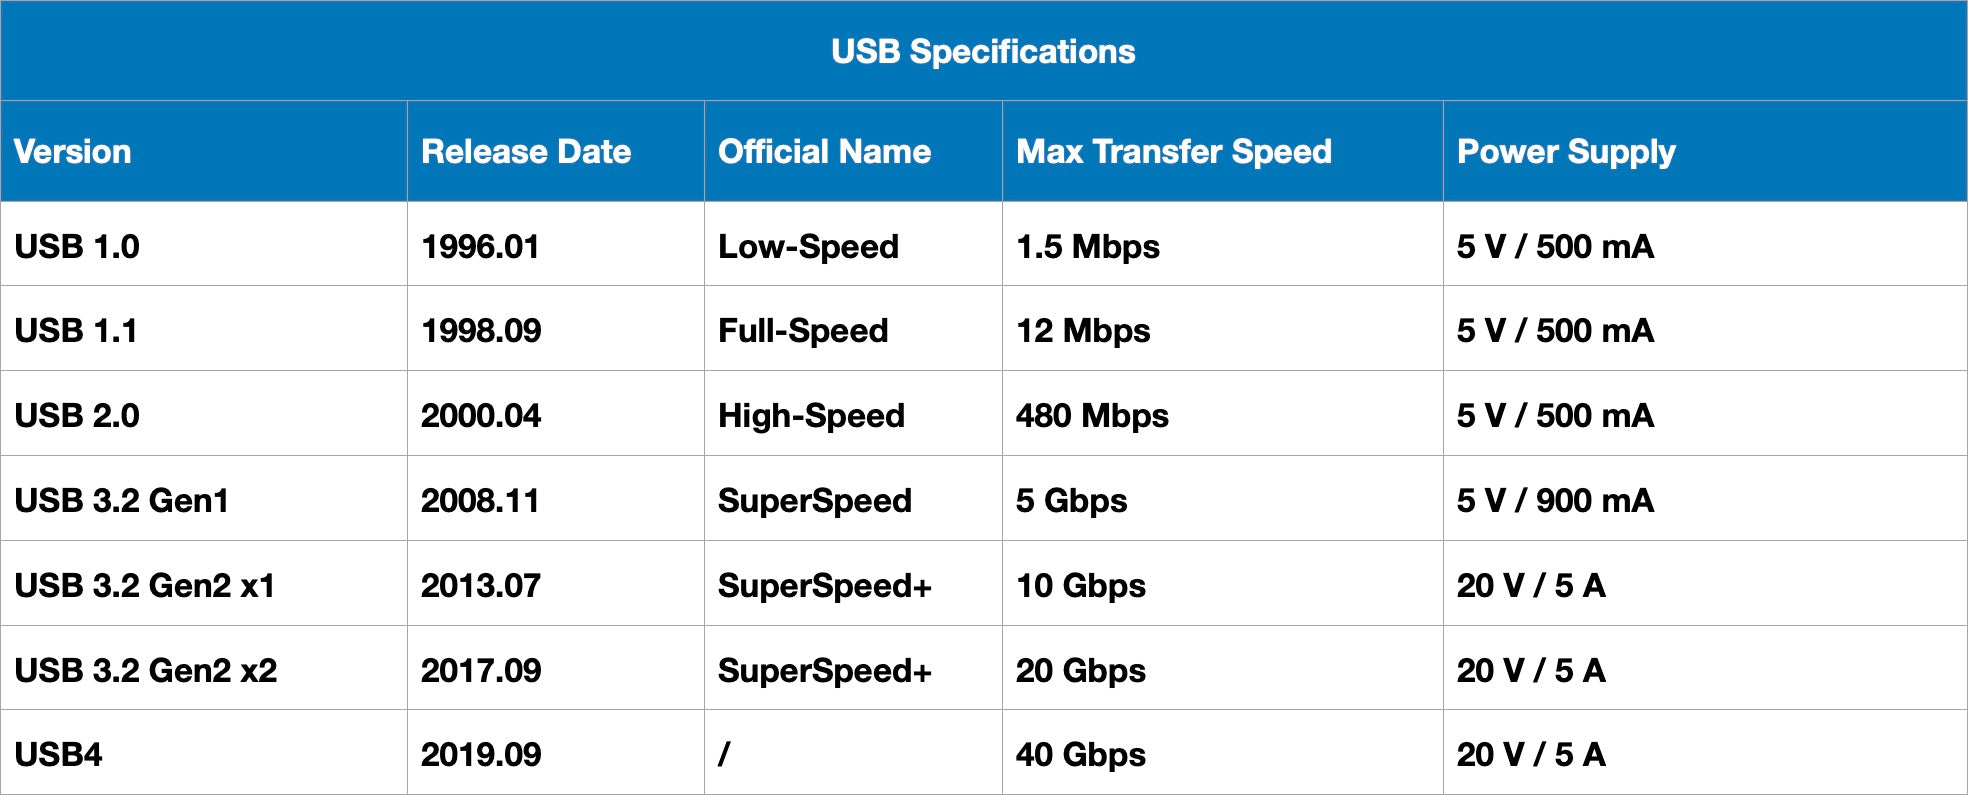 USB Specifications